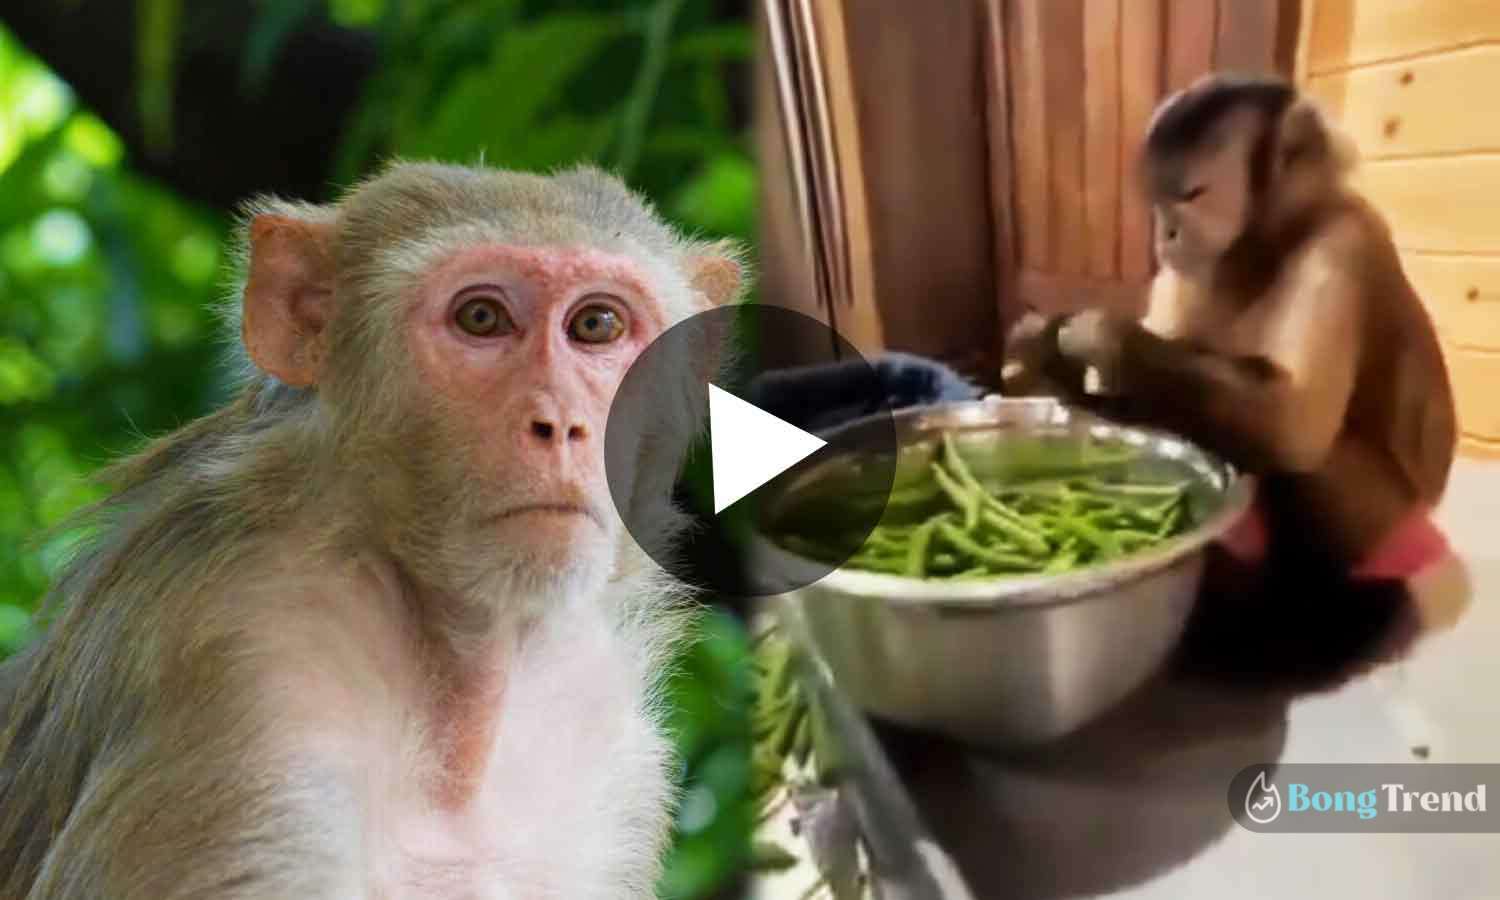 Viral Video of Monkey Cutting Vegetables